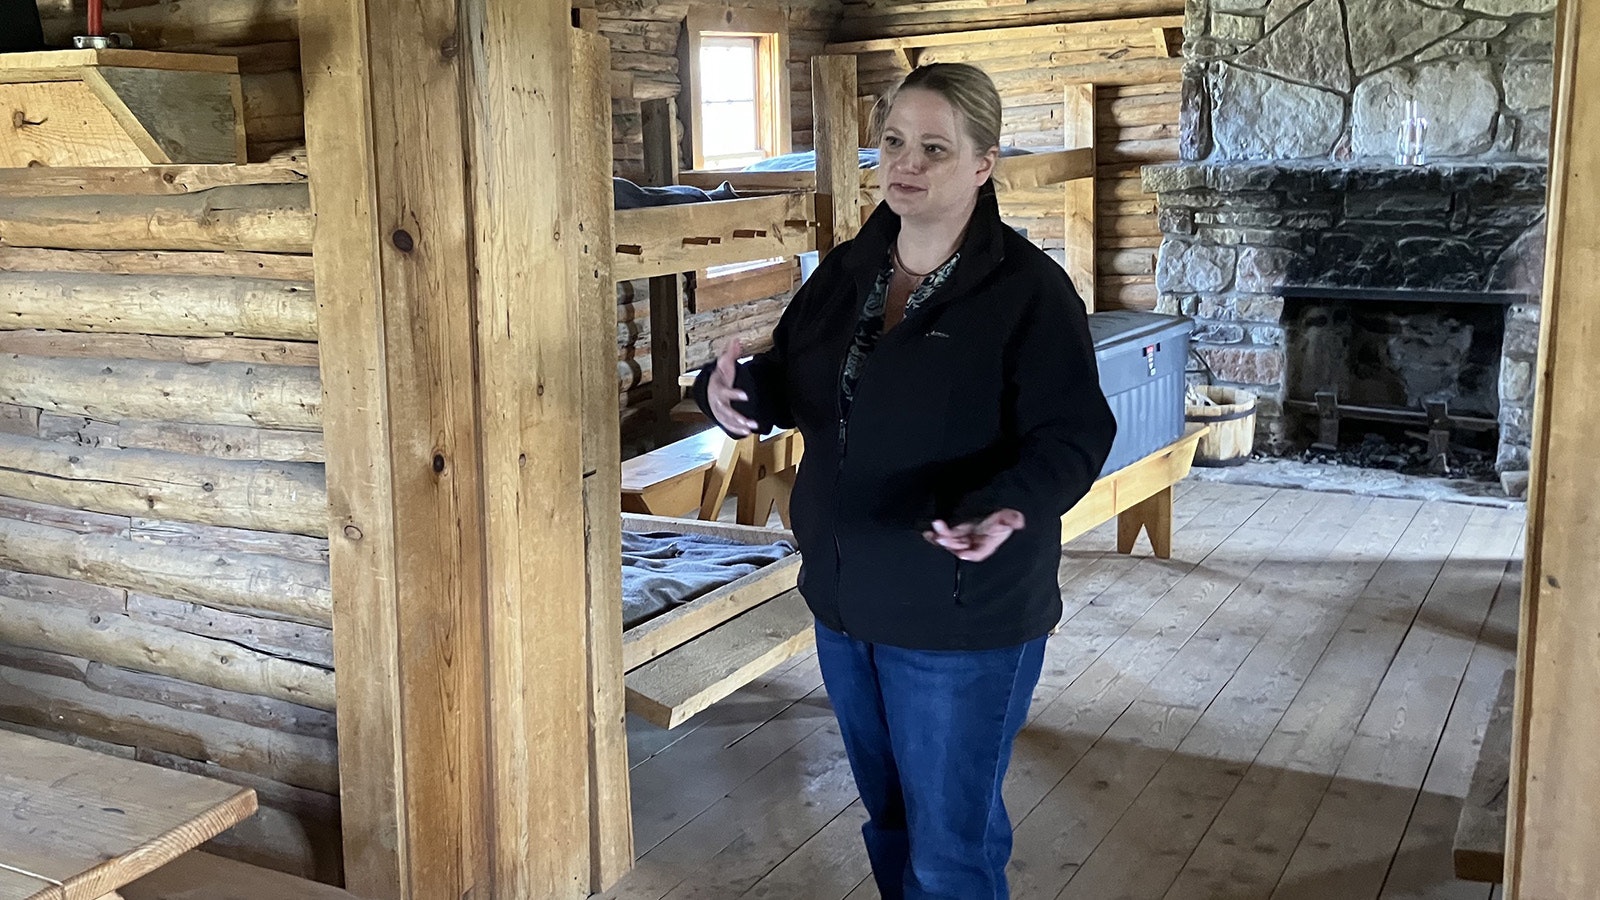 Historian and Fort Caspar Museum Association Vice President Johanna Wickman shares about the strange occurrences that have occurred in the cavalry barracks.